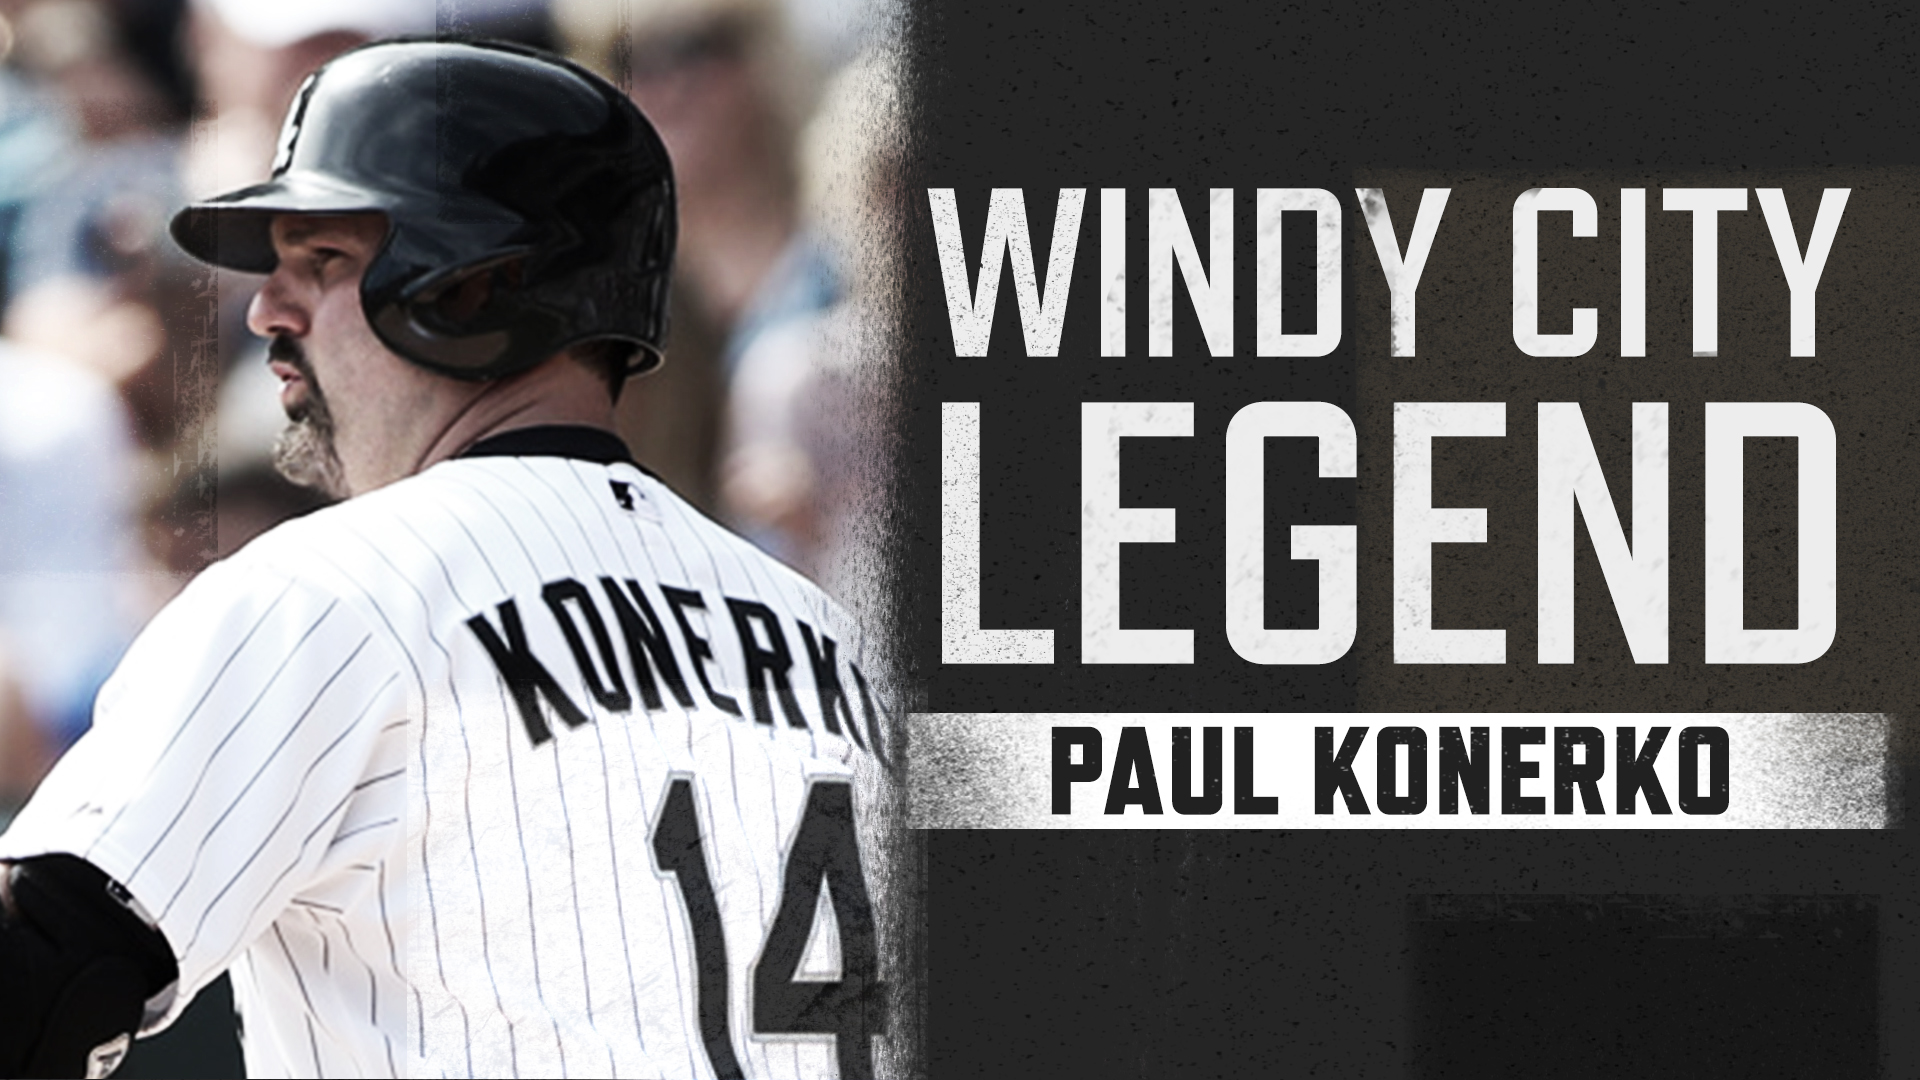 No list of South Side legends is complete without Paul Konerko